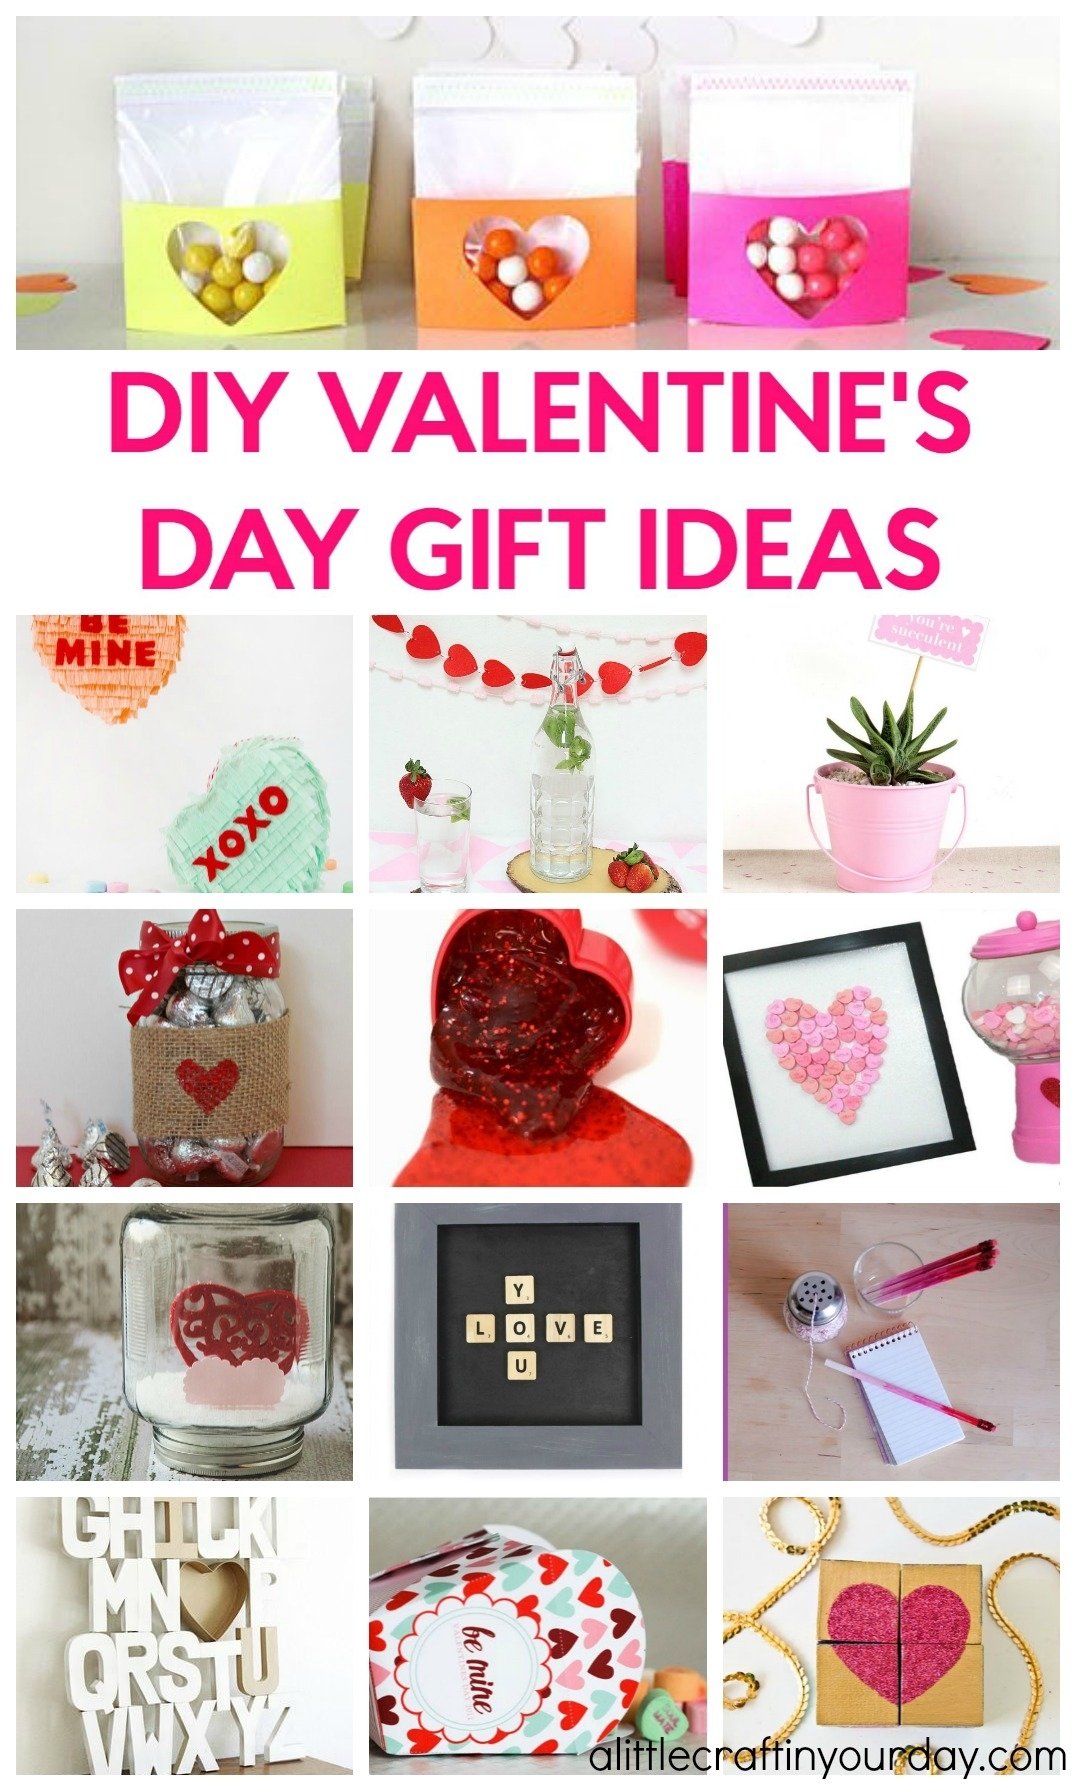 10 Elegant Valentines Day Gift Ideas For Wife diy valentines day gift ideas a little craft in your day 2022